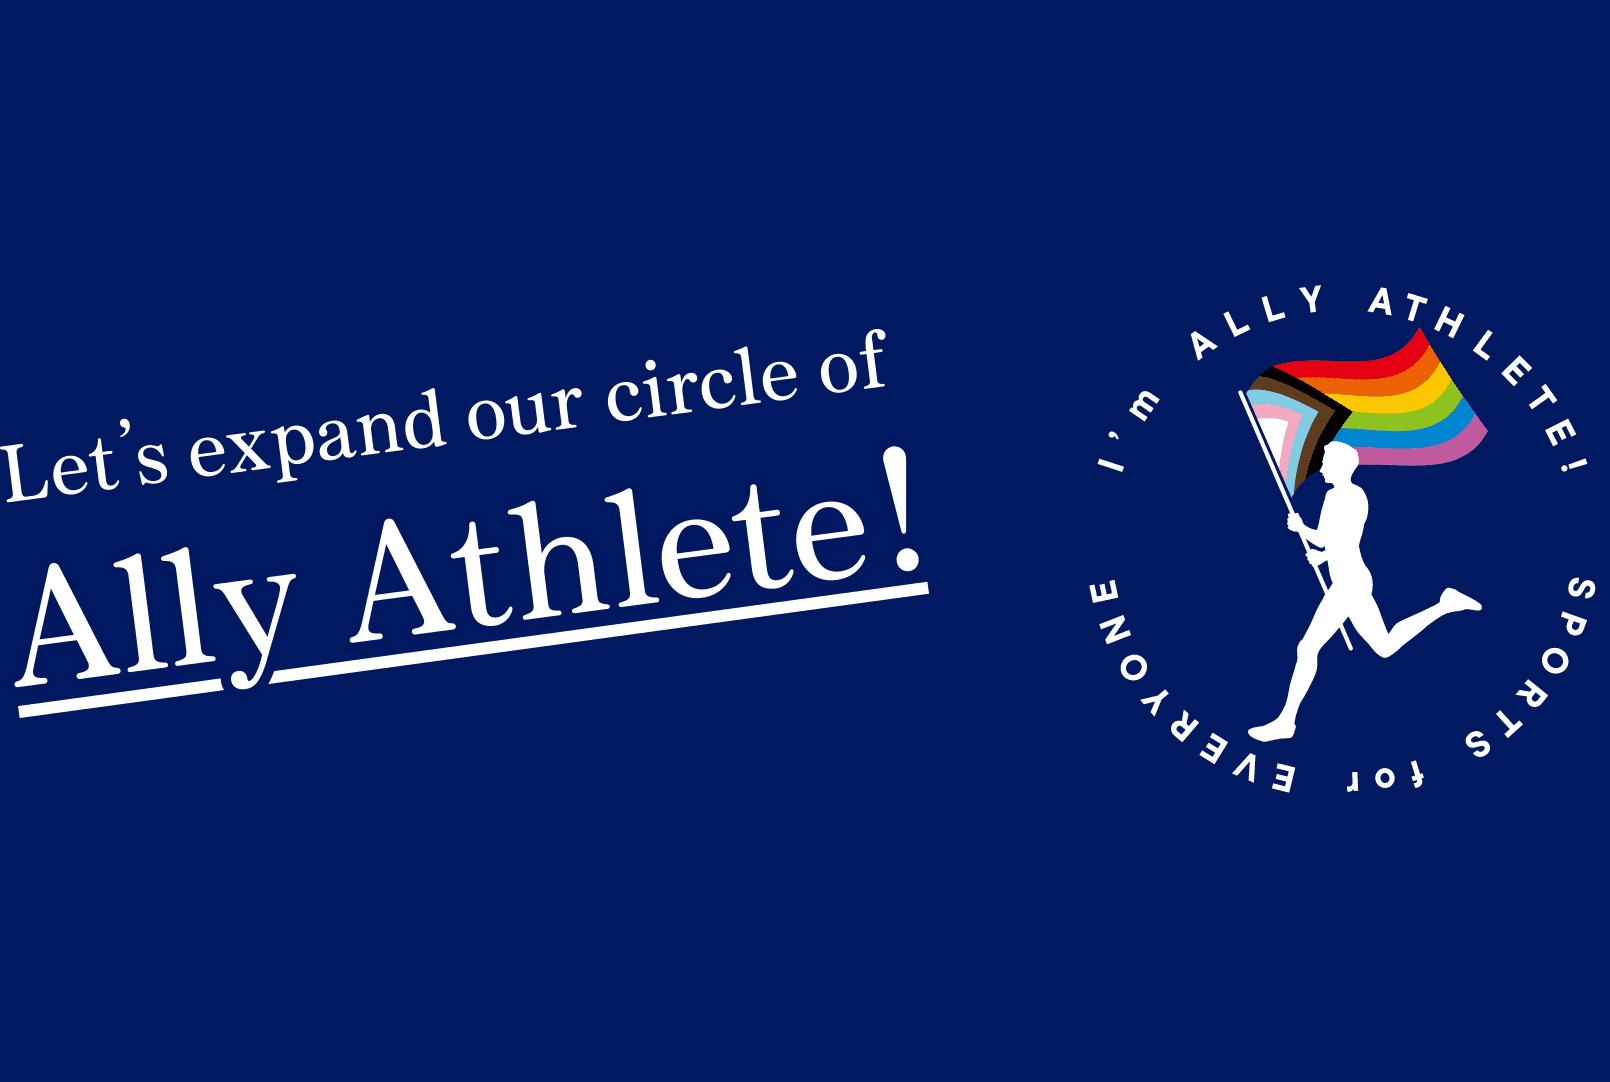 Let's expand our circle of Ally Athlete!